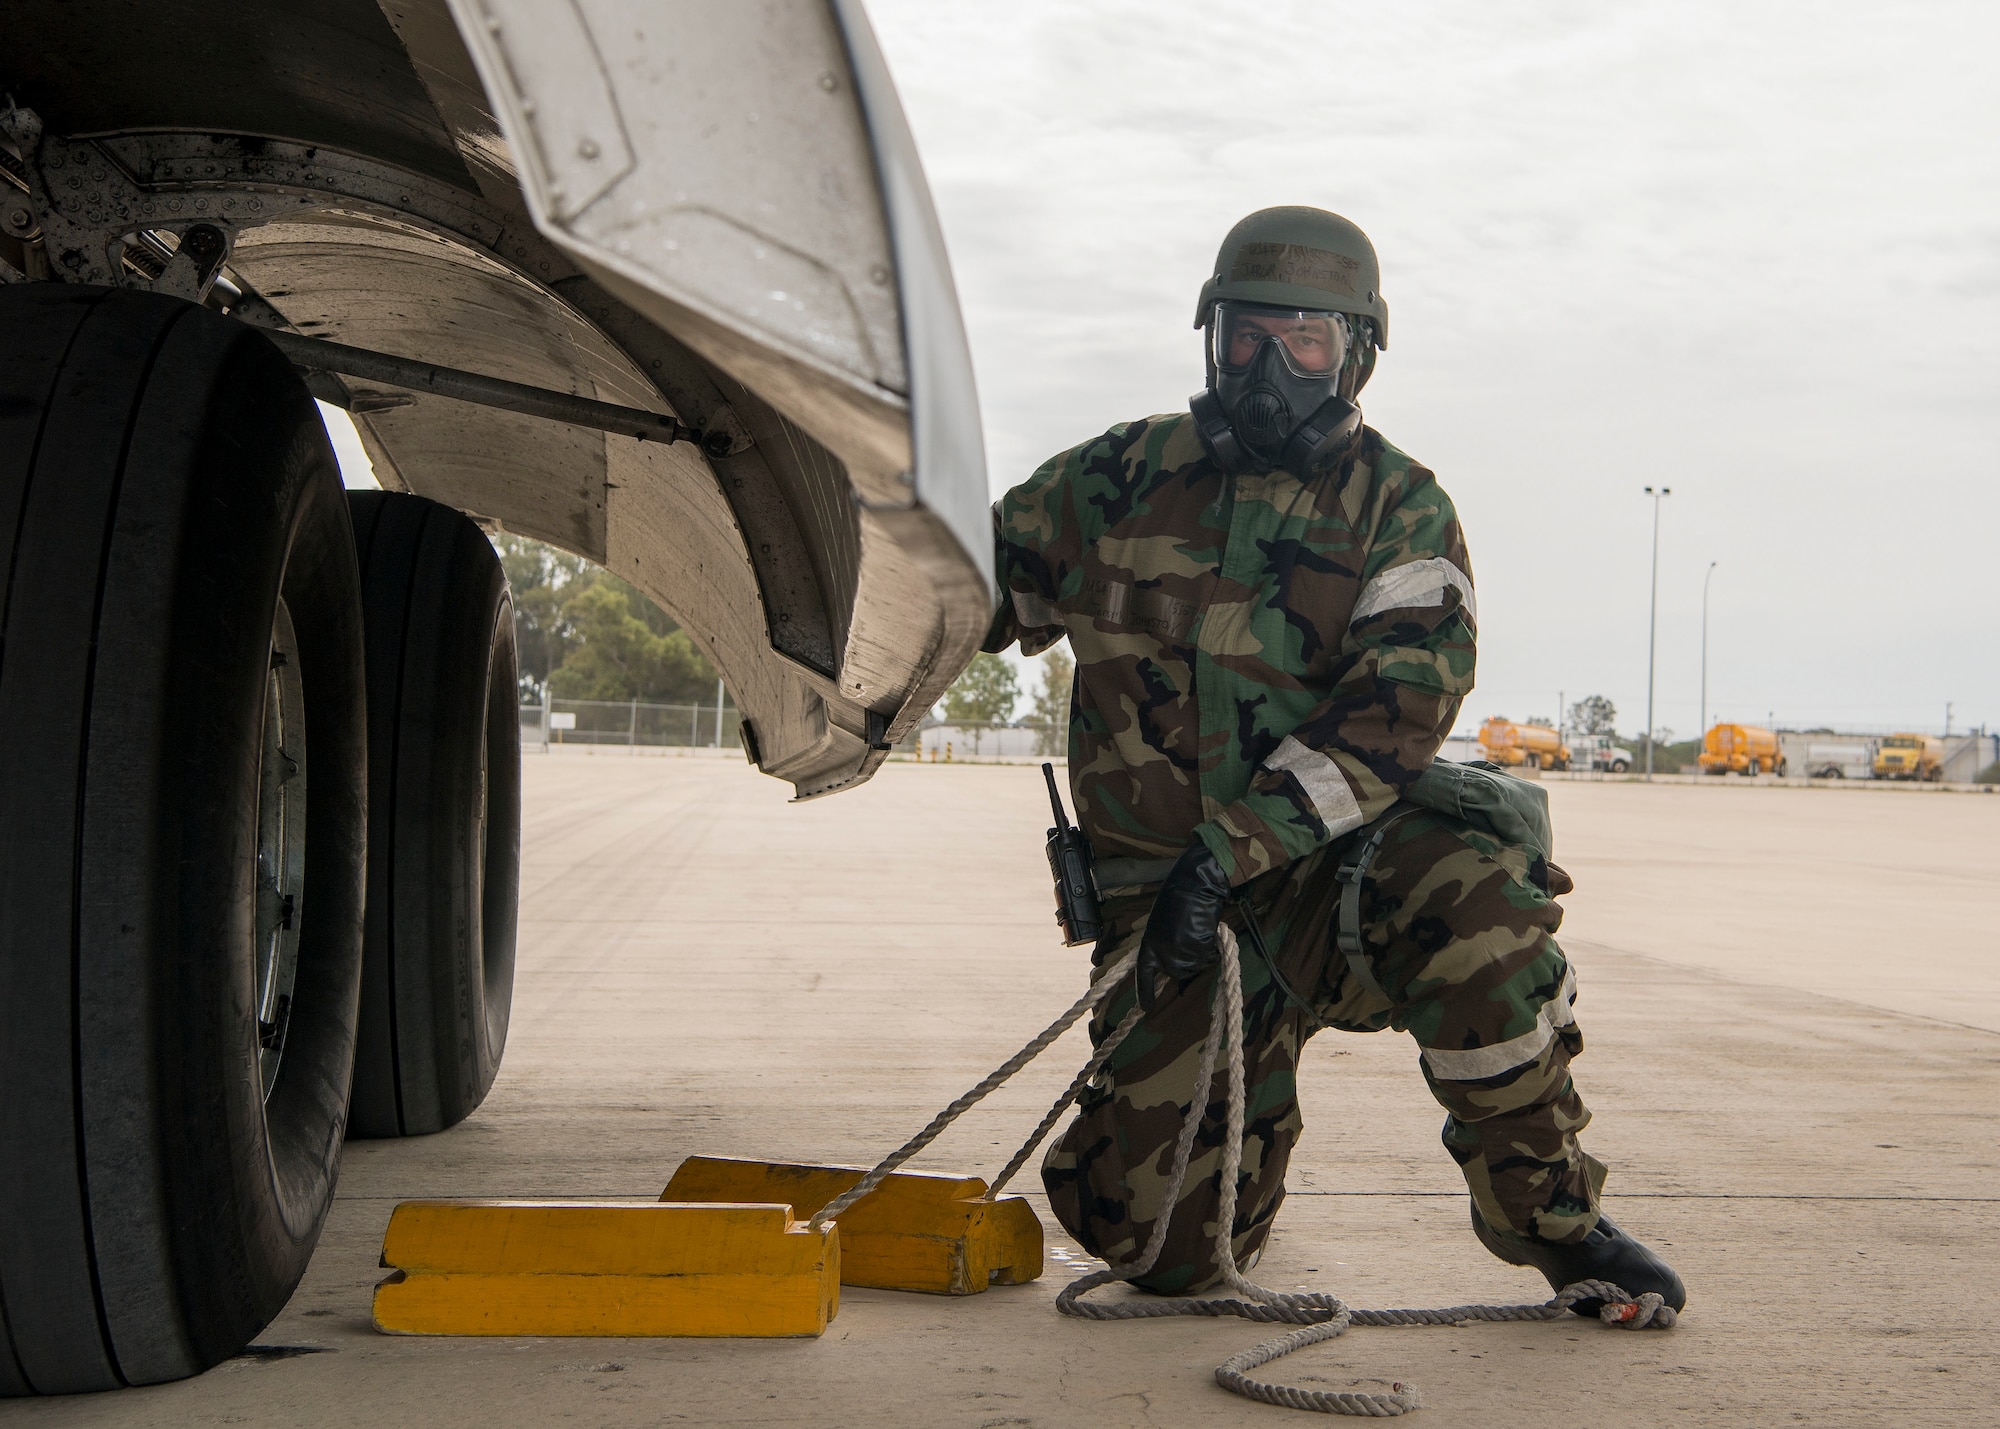 U.S. Air Force Staff Sgt. Jarom Johnston, attached to the 521st Air Mobility Squadron pulls blocks from U.S. Air Force C-17 Globemaster III wheels during exercise Nodal Lightning 20-2.